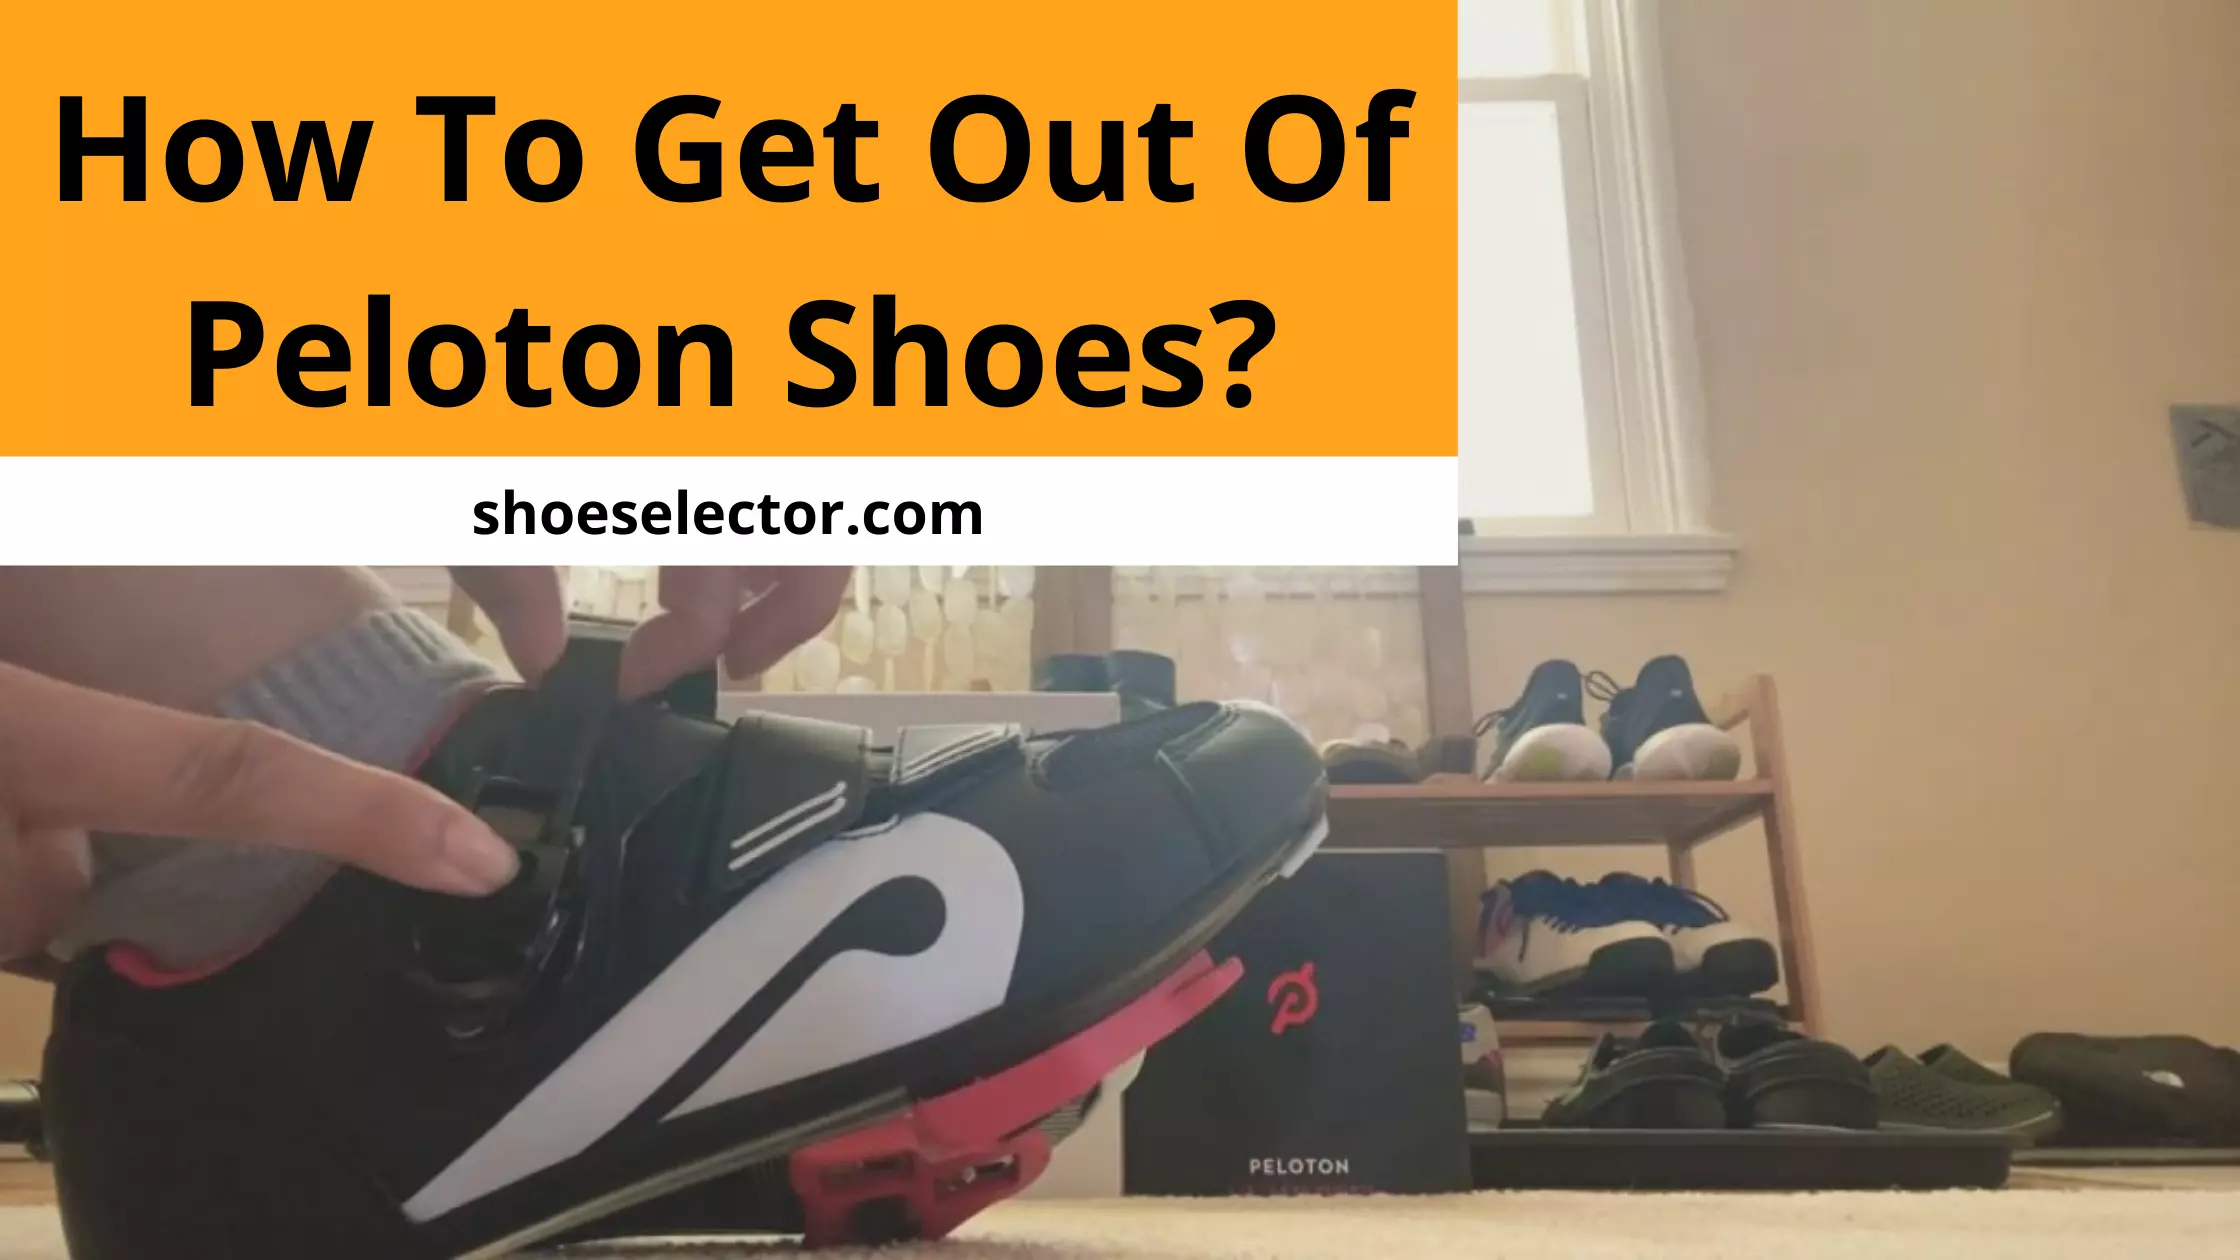 How To Get Out Of Peloton Shoes?